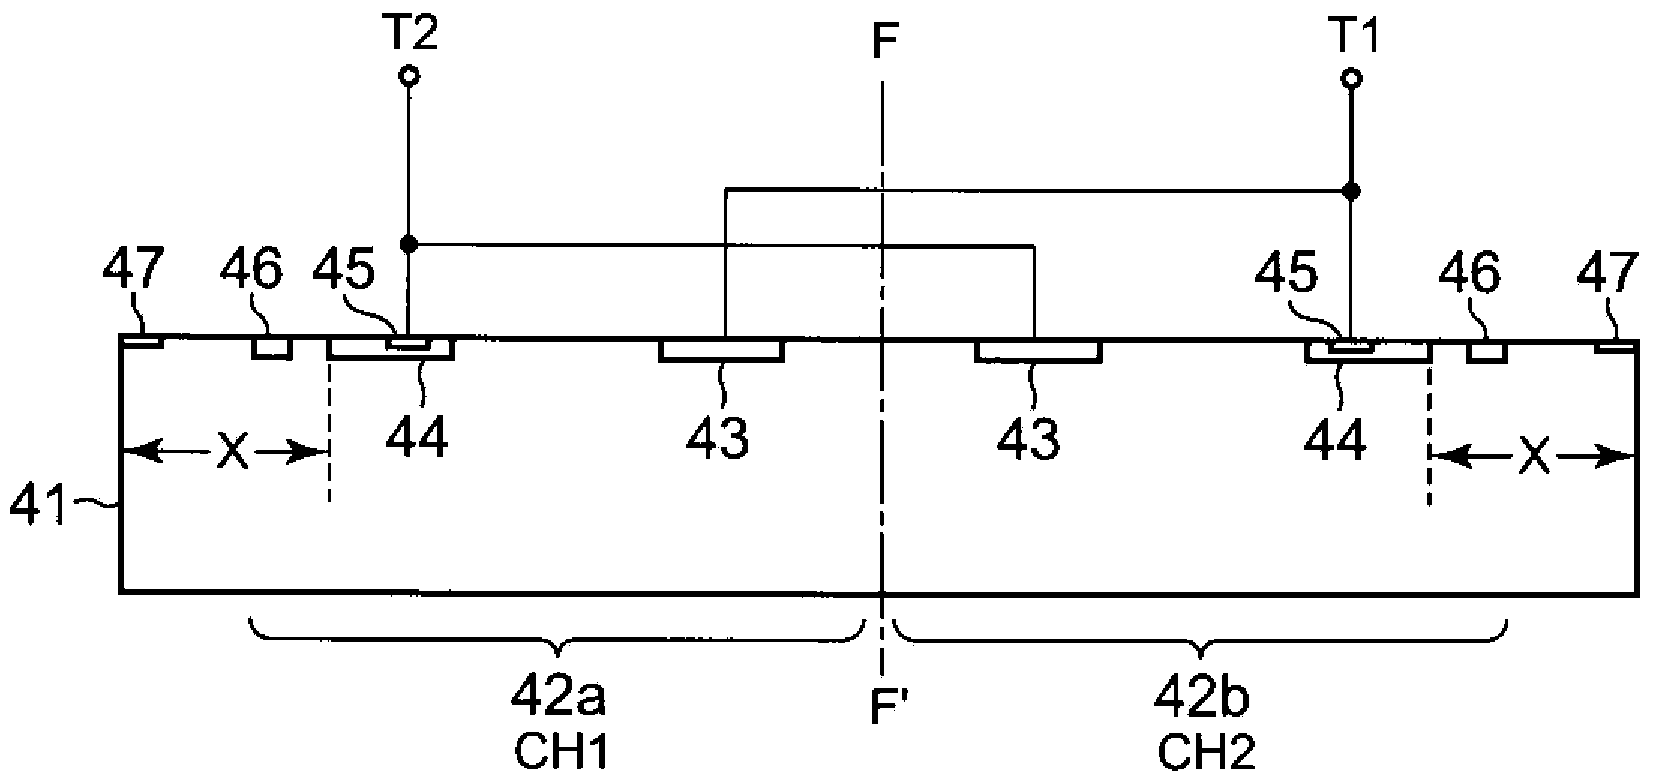 Bi-directional light control thyratron transistor chip, optical triggering coupler and solid-state relay